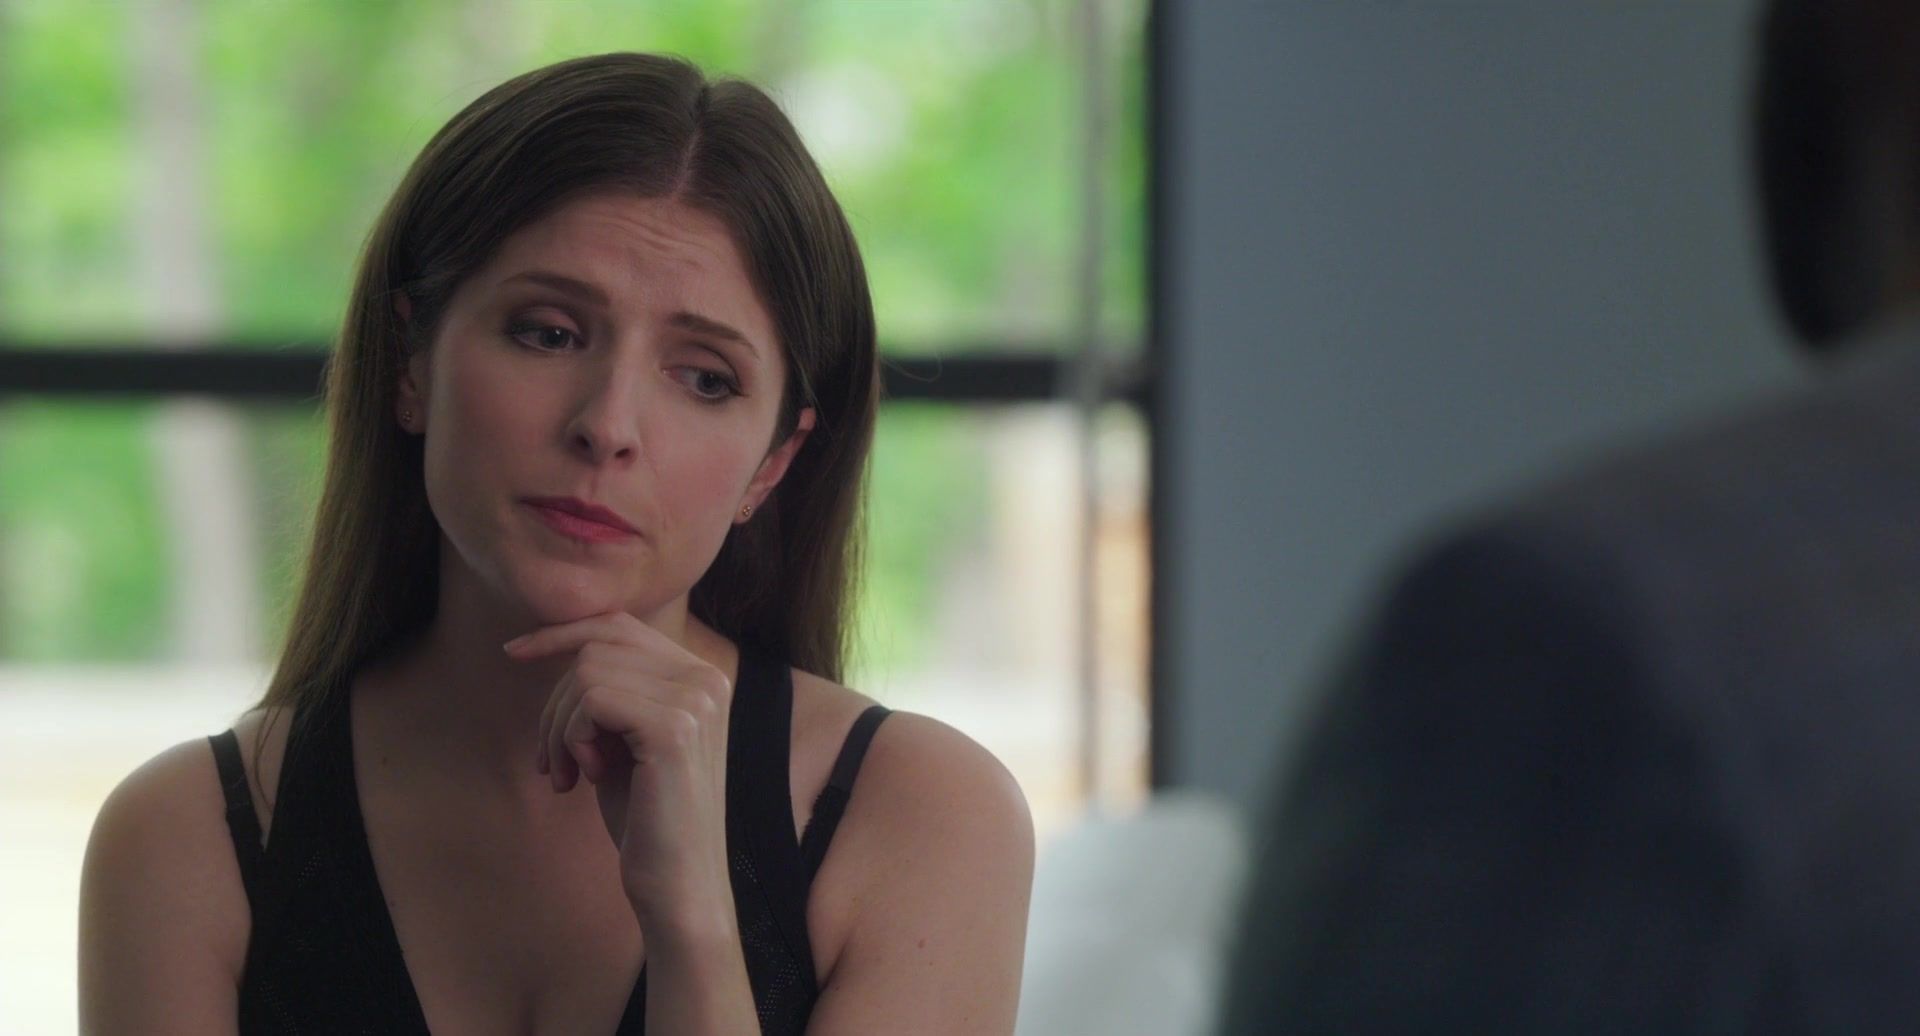 Her Anna Kendrick, Blake Lively nude - A Simple Favor (2018) Behind - 2